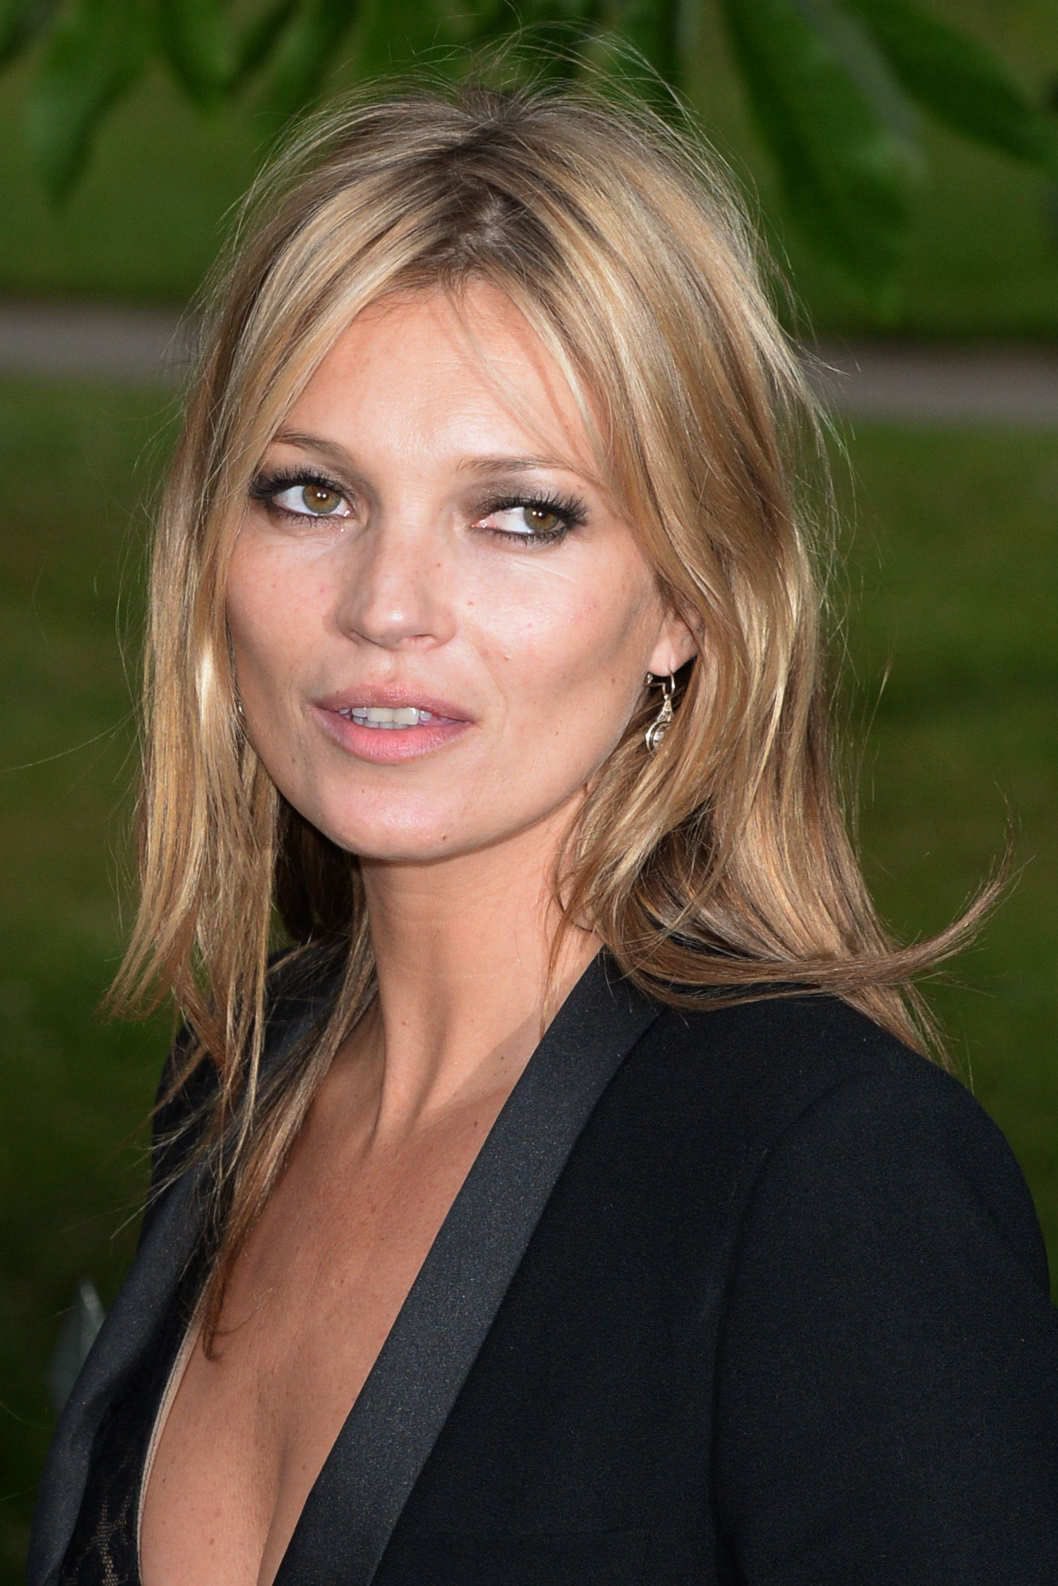 A happy belated birthday to one of the original supermodels, Kate Moss 